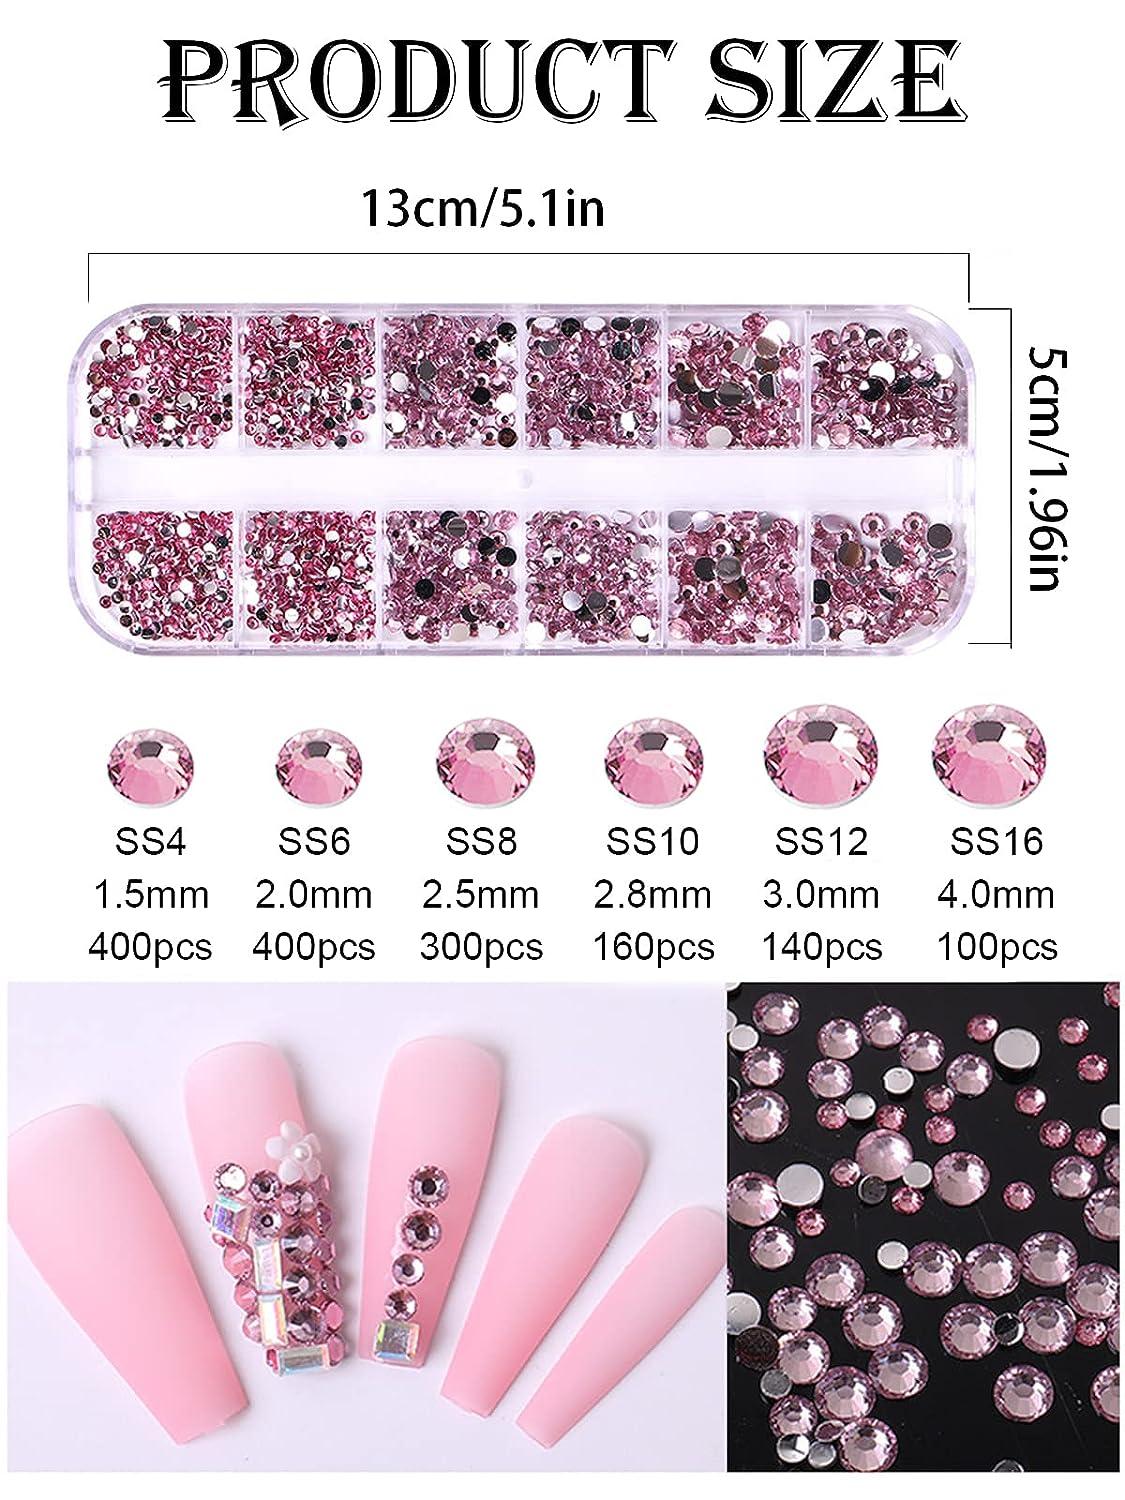  660Pcs Light Pink Rhinestones Crystals Gems Nail Art Flat Back  Round Multi Sized Shapes Pink Gems Rhinestone Stones Beads for Nail Art DIY  Jewelry Crafts Accessories : Beauty & Personal Care